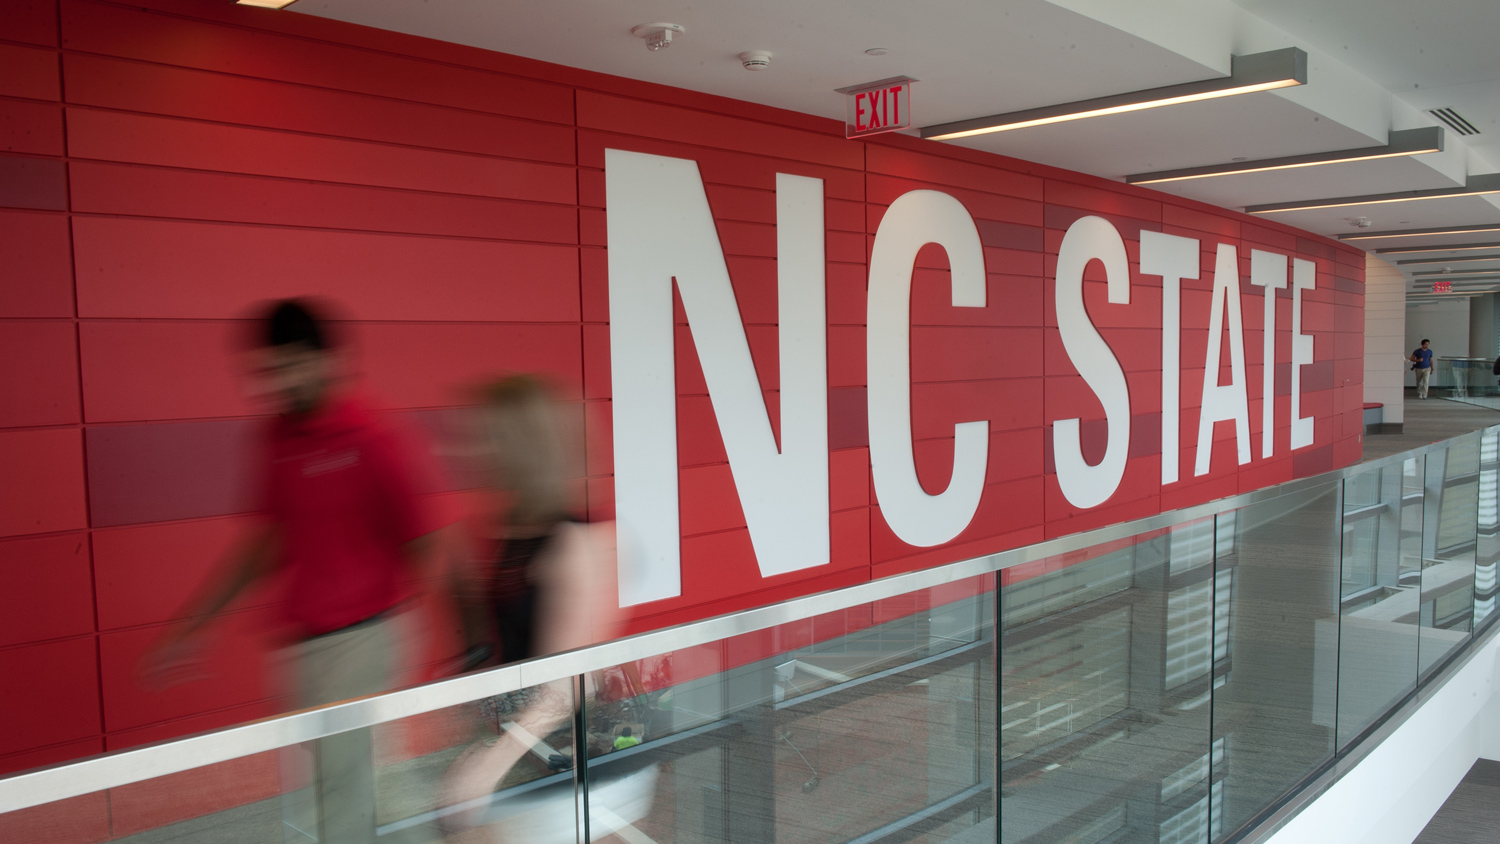 NC State wall in Talley Student Center